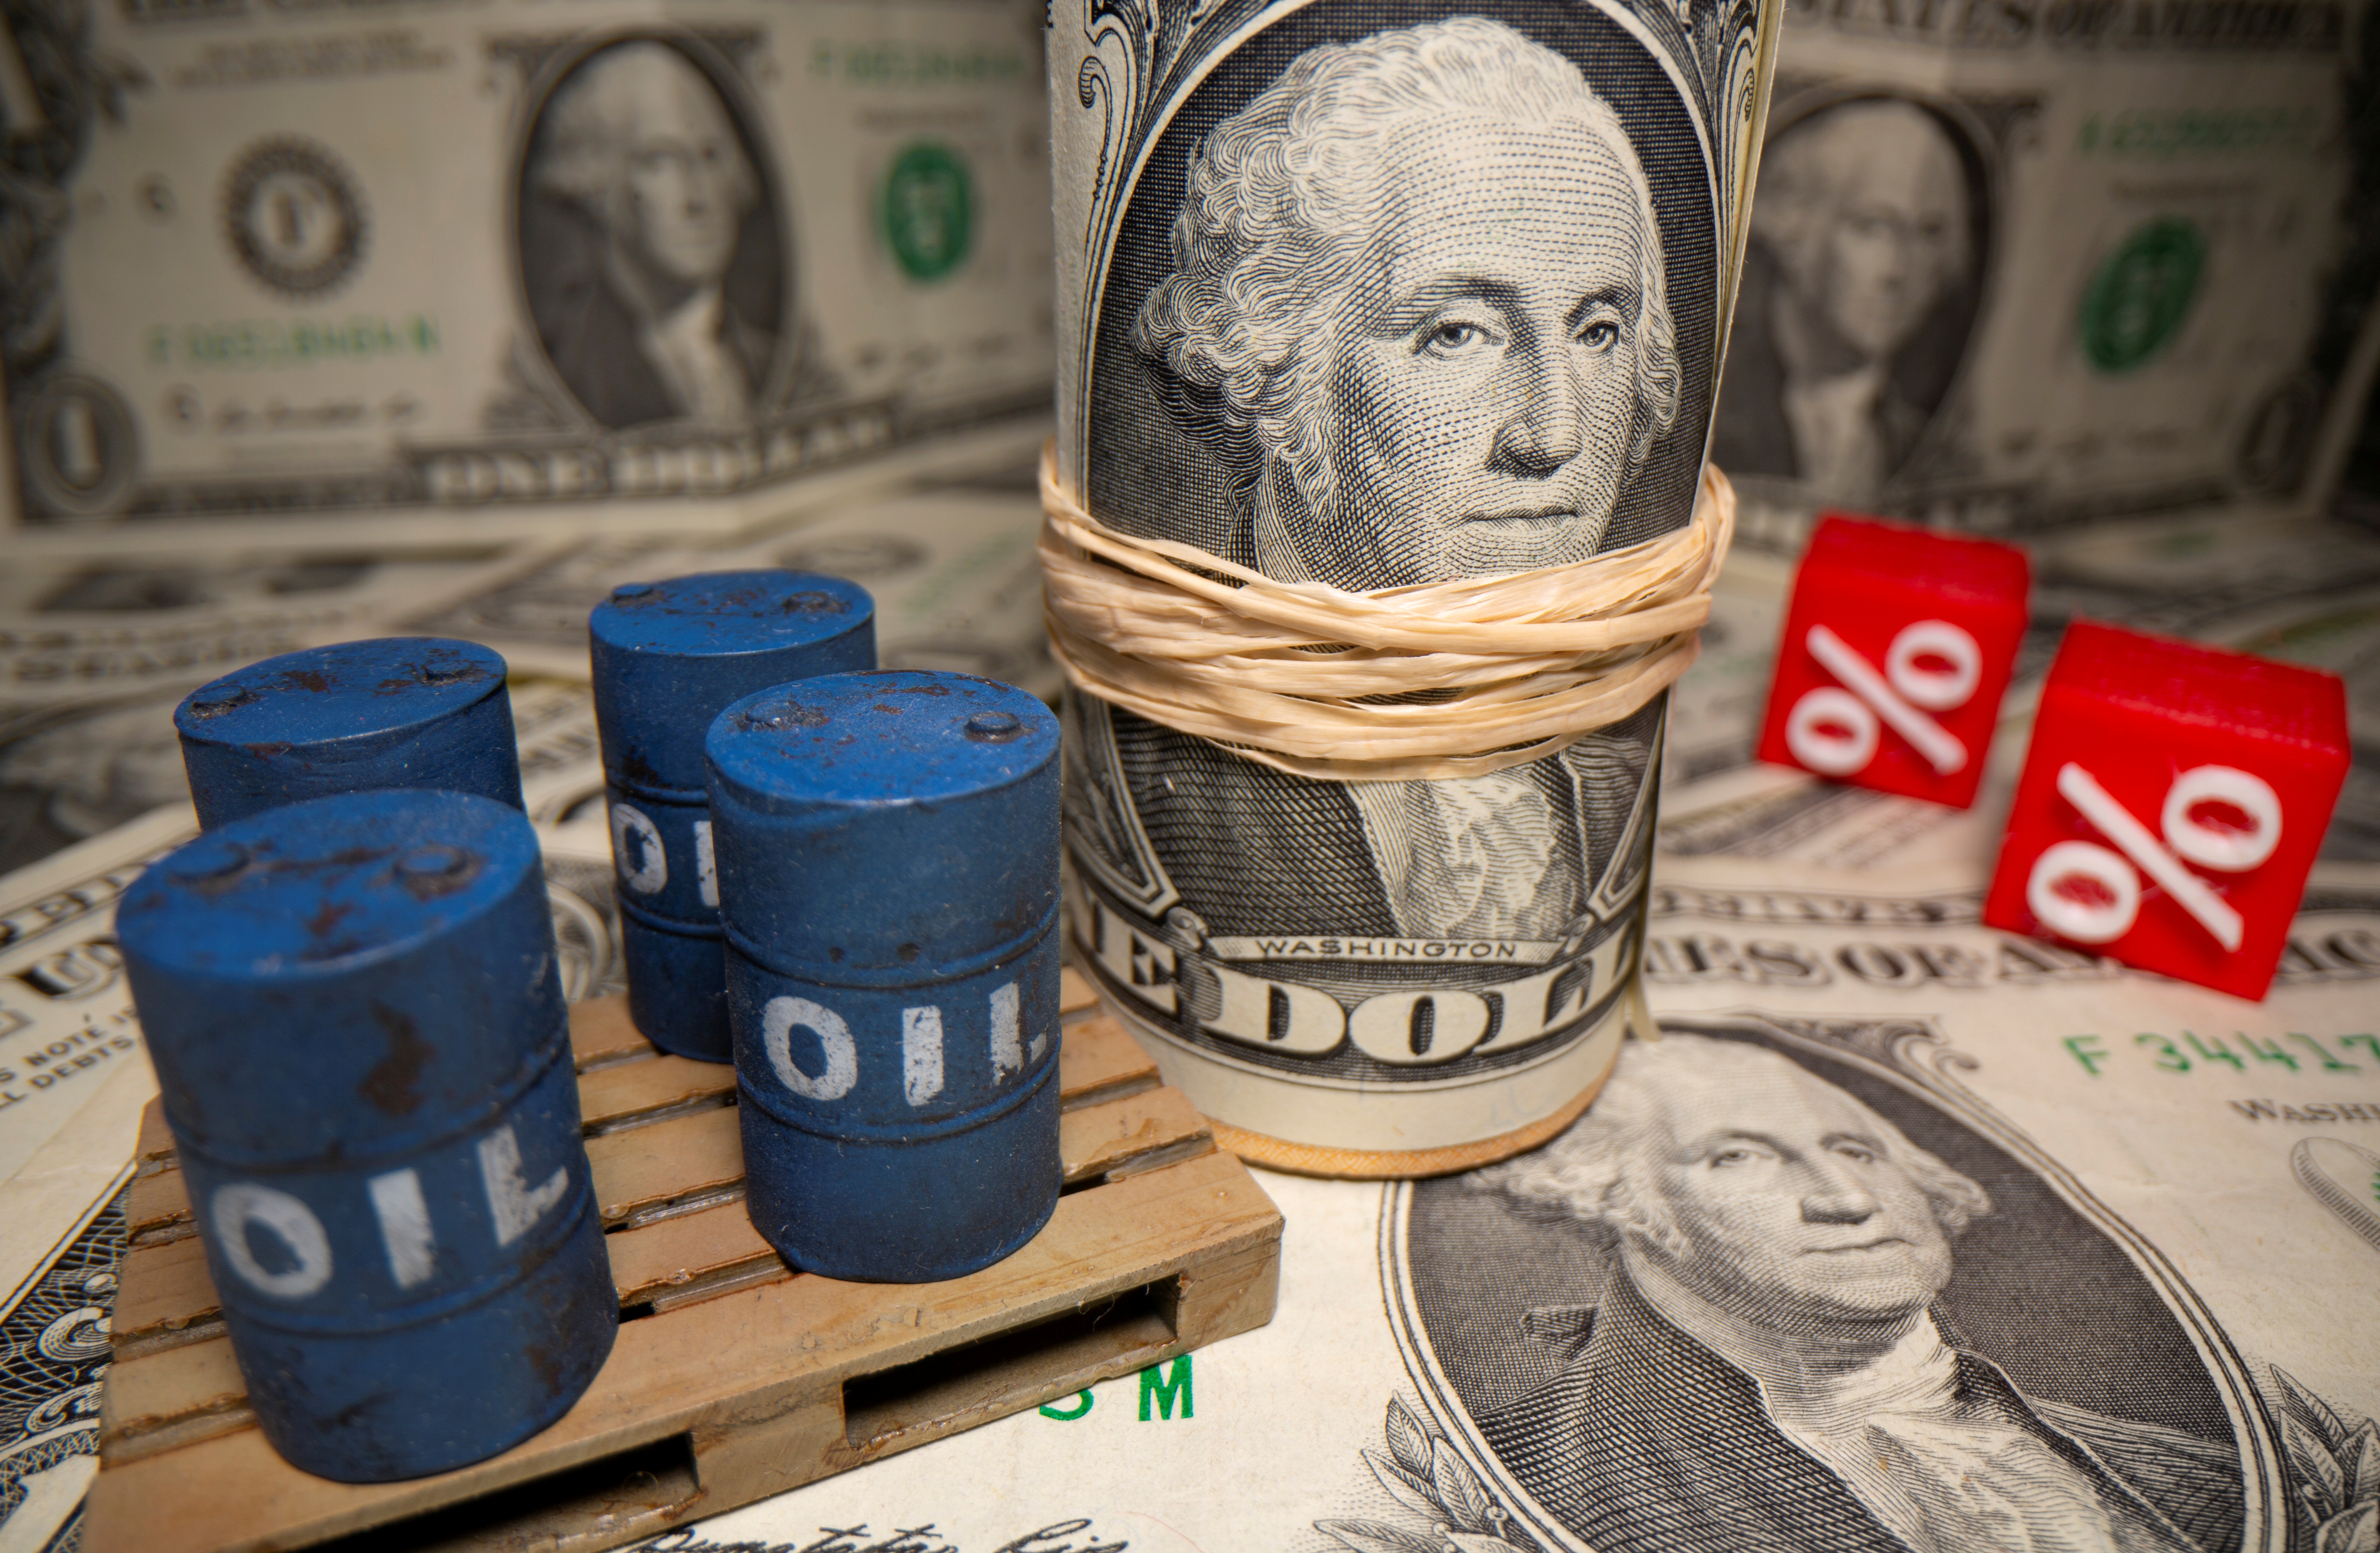 3D printed oil barrels and percentage symbols are seen in front of dollar banknotes in this illustration